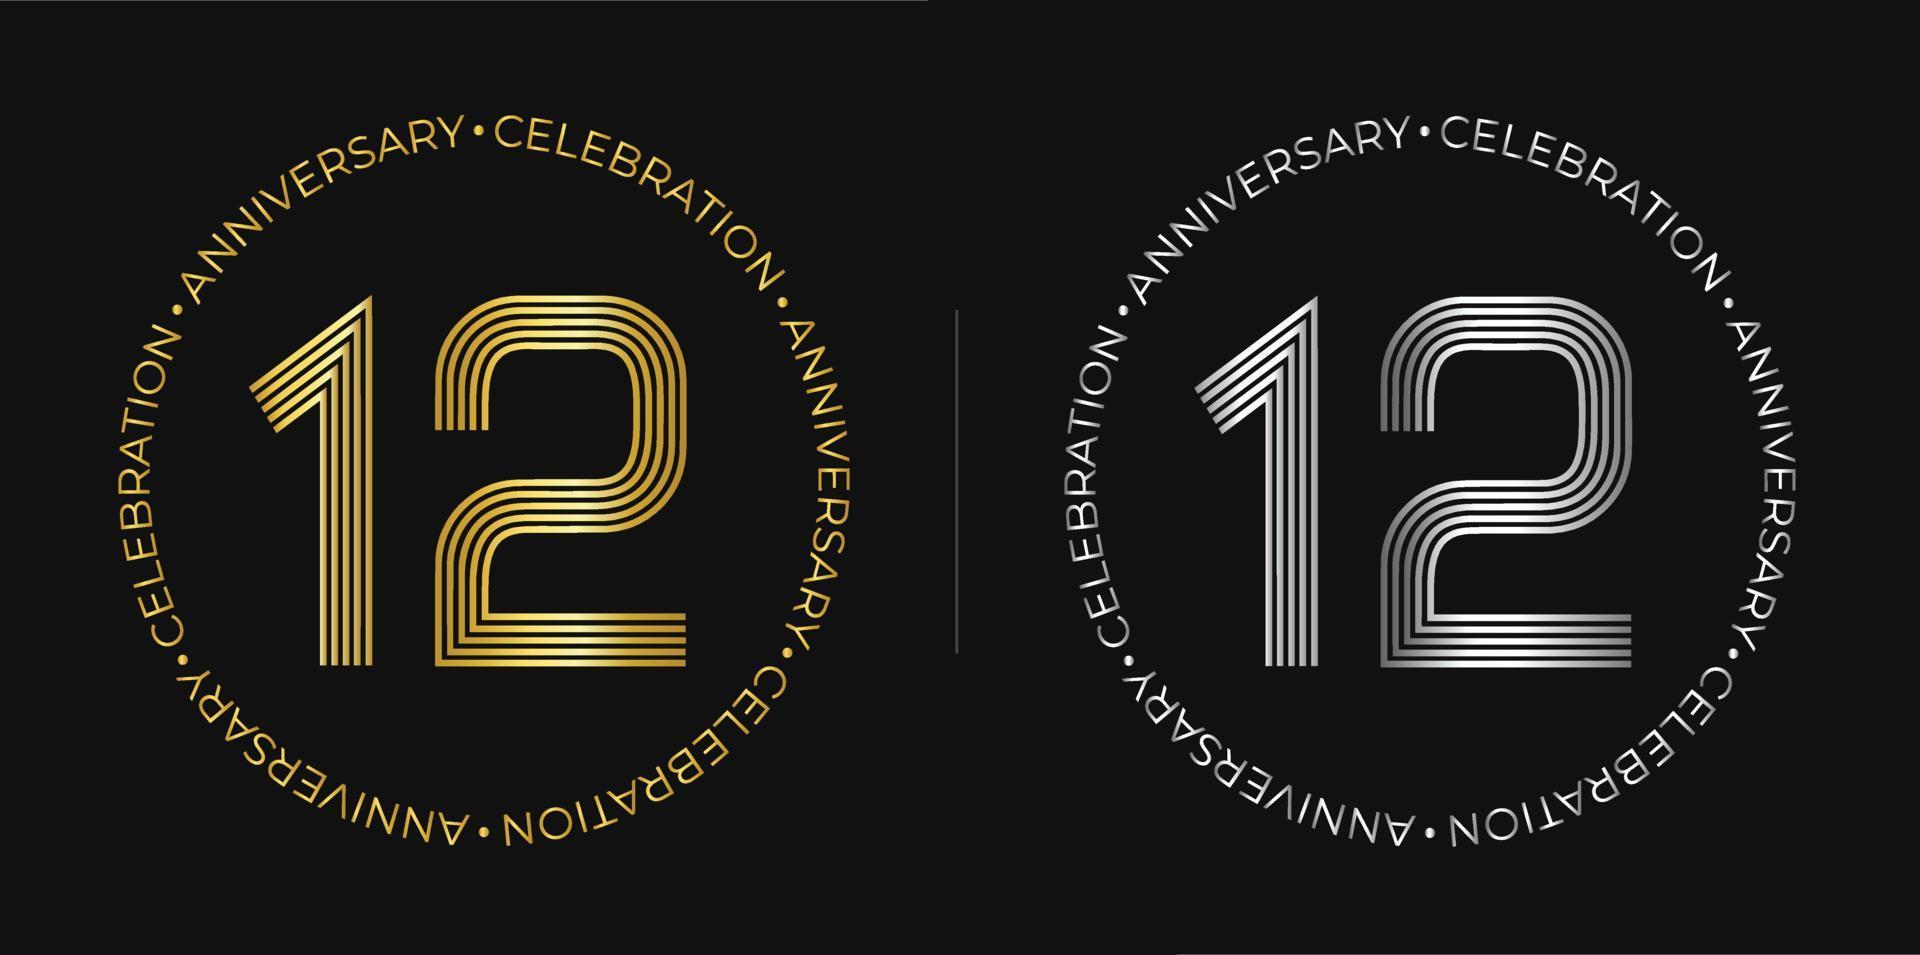 12th birthday. Twelve years anniversary celebration banner in golden and silver colors. Circular logo with original numbers design in elegant lines. vector